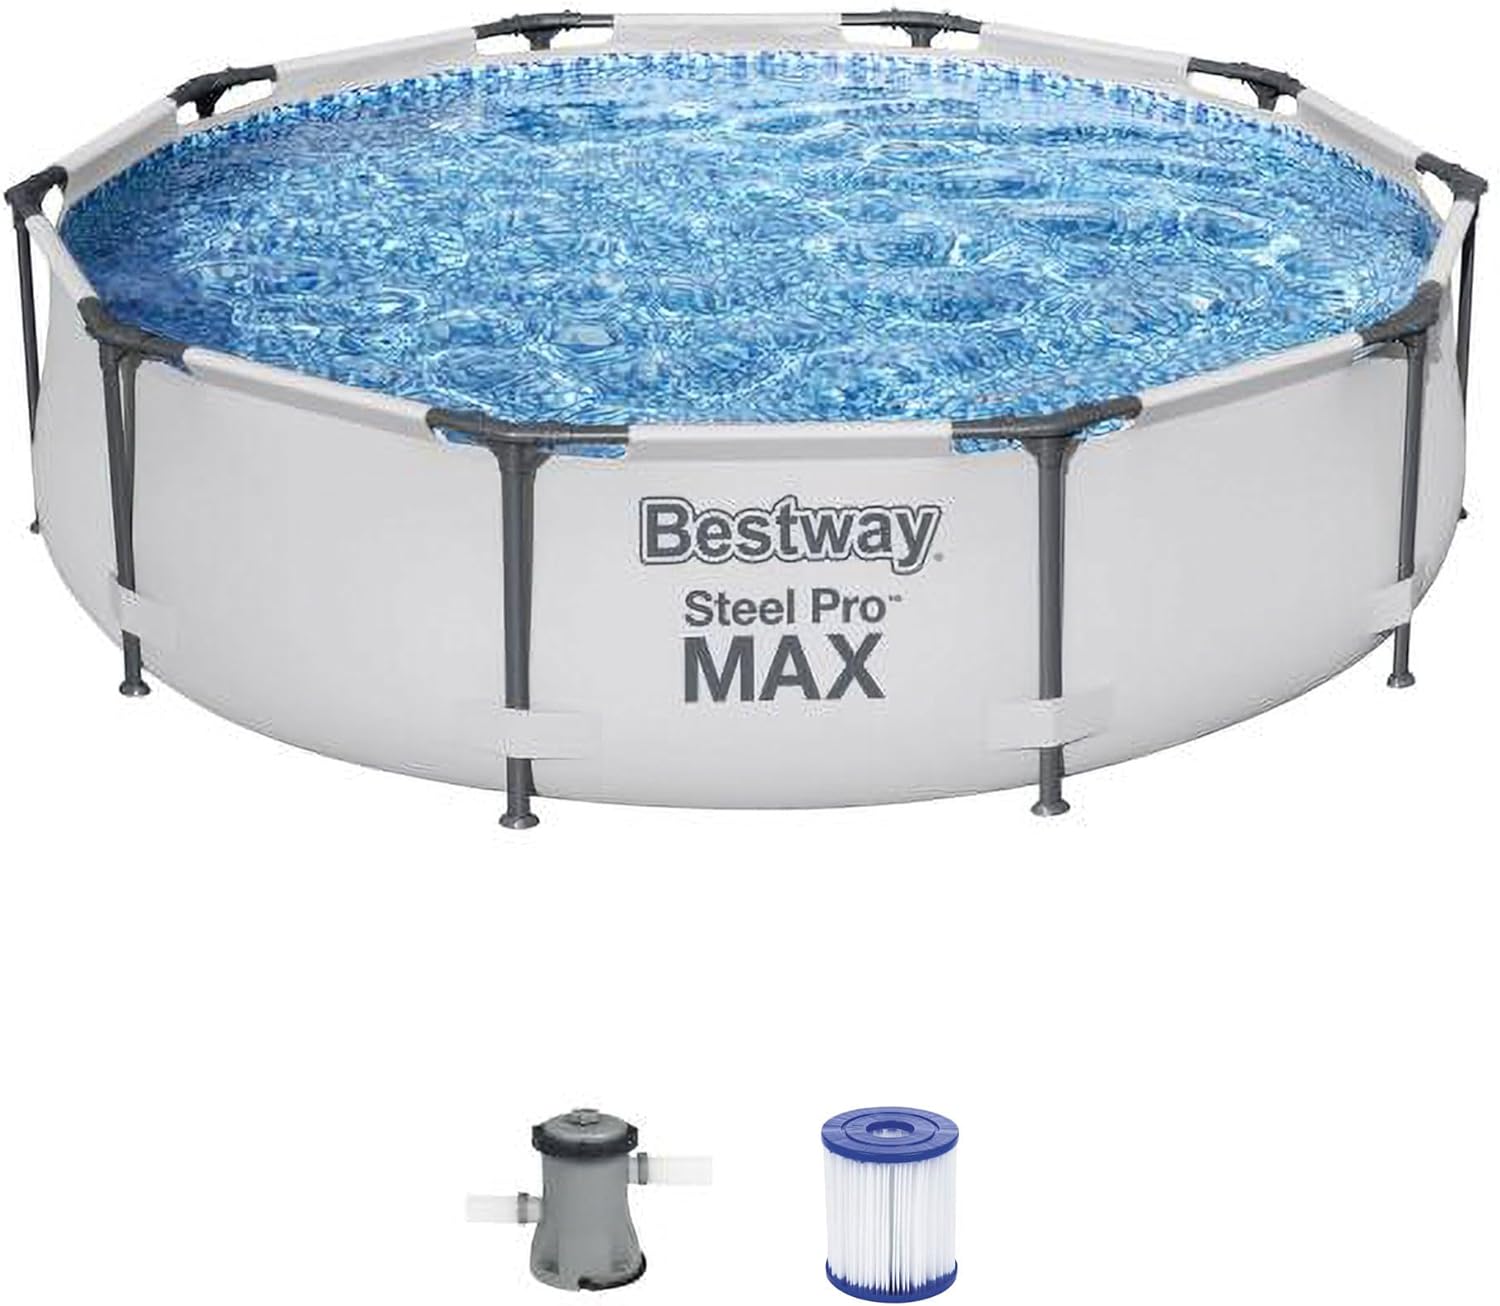 I love our pool. Set up was easy (but requires two people to make it smooth). It is a good working pool! Did have to shock it more then what I thought I would normally but the pump wasnt super powerful. Everything worked and a great price for product!